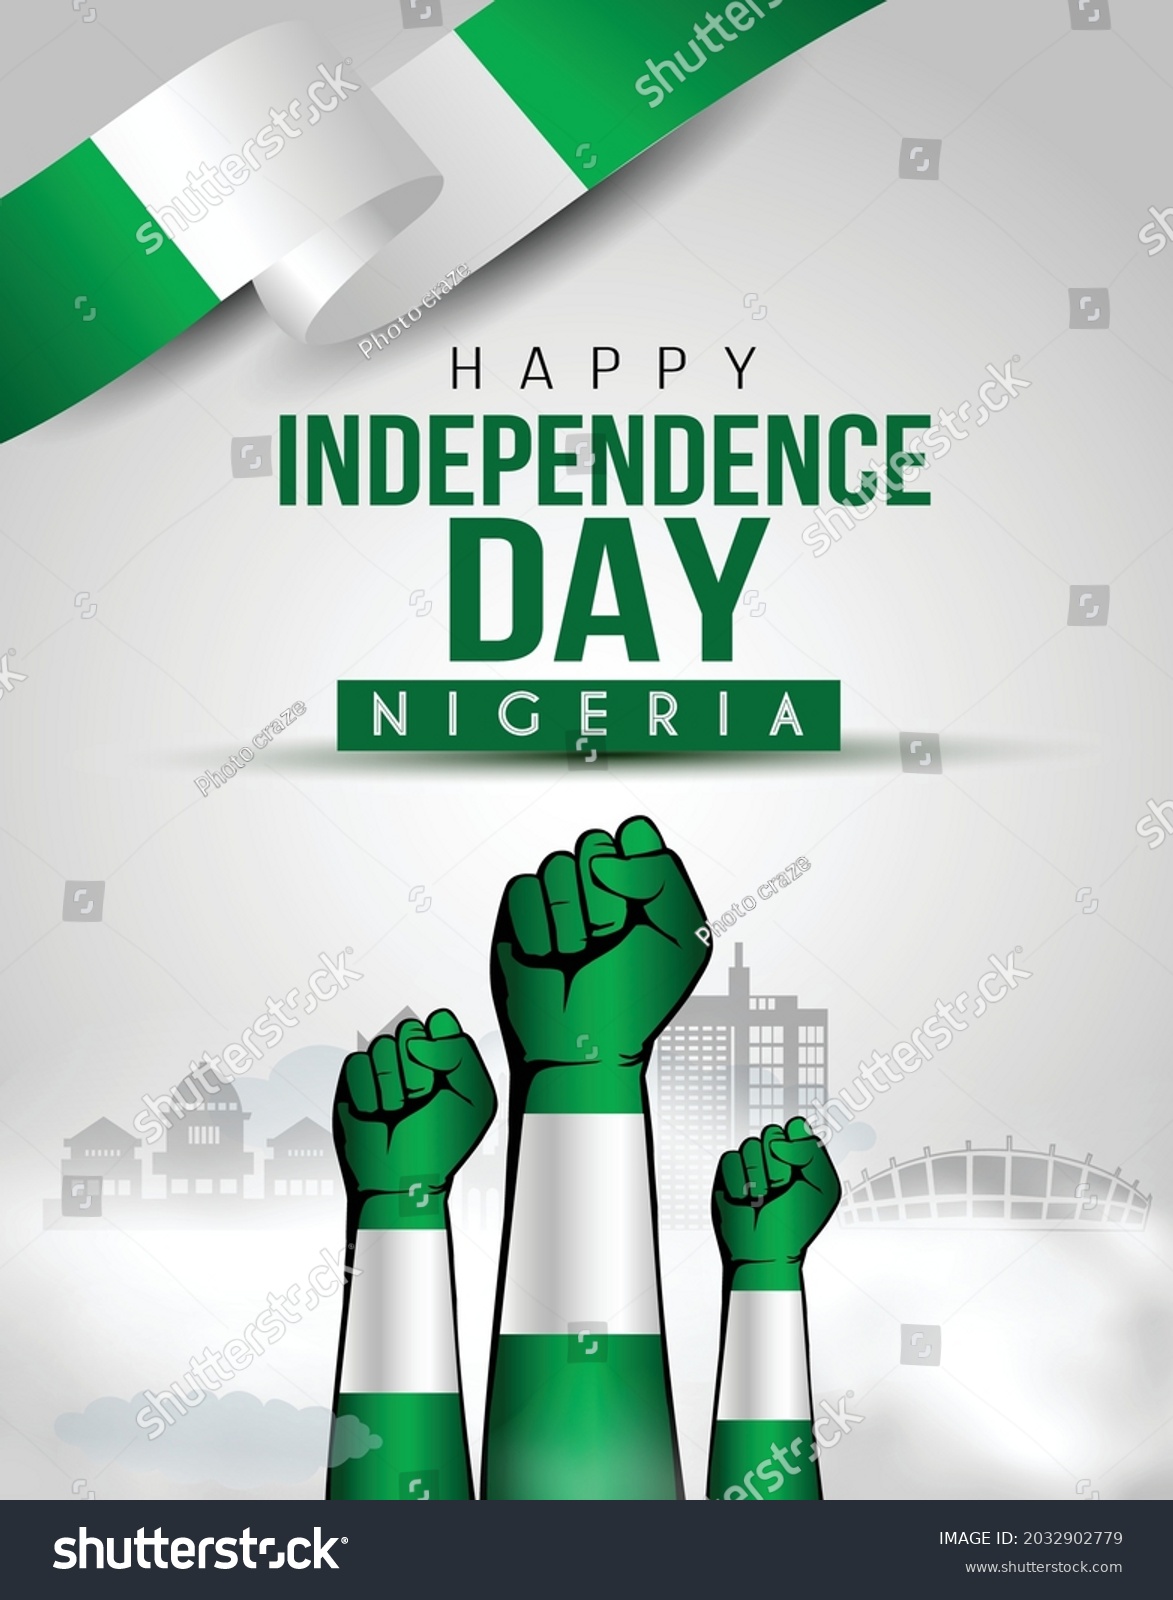 Nigeria At 63: Happy Independence Day messages, quotes, prayers, wishes